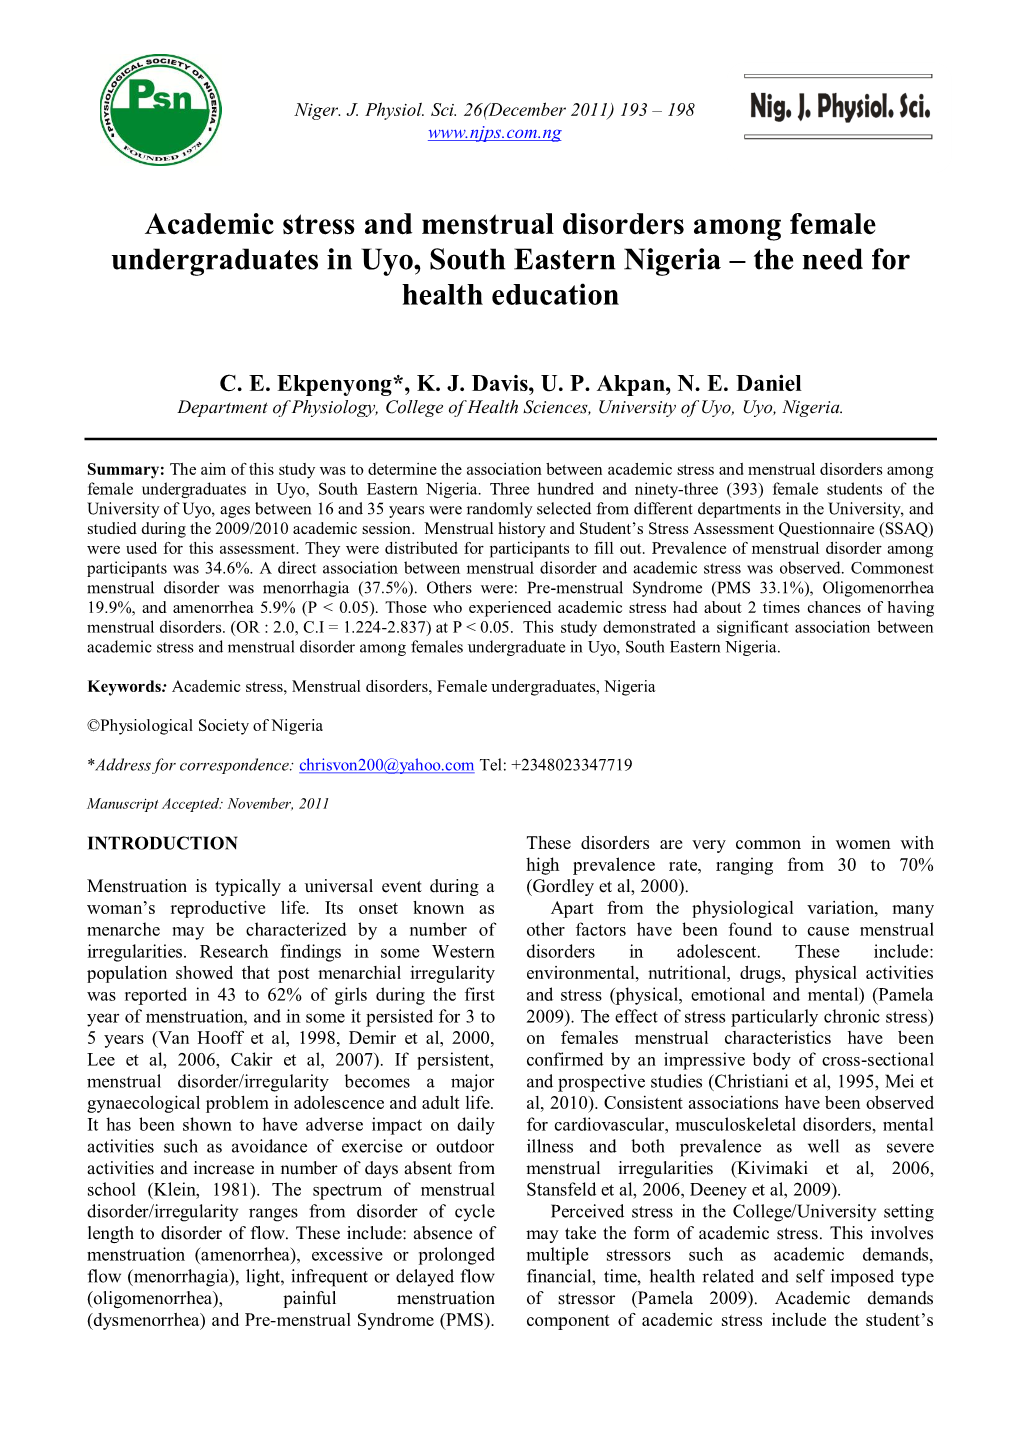 Academic Stress and Menstrual Disorders Among Female Undergraduates in Uyo, South Eastern Nigeria – the Need for Health Education